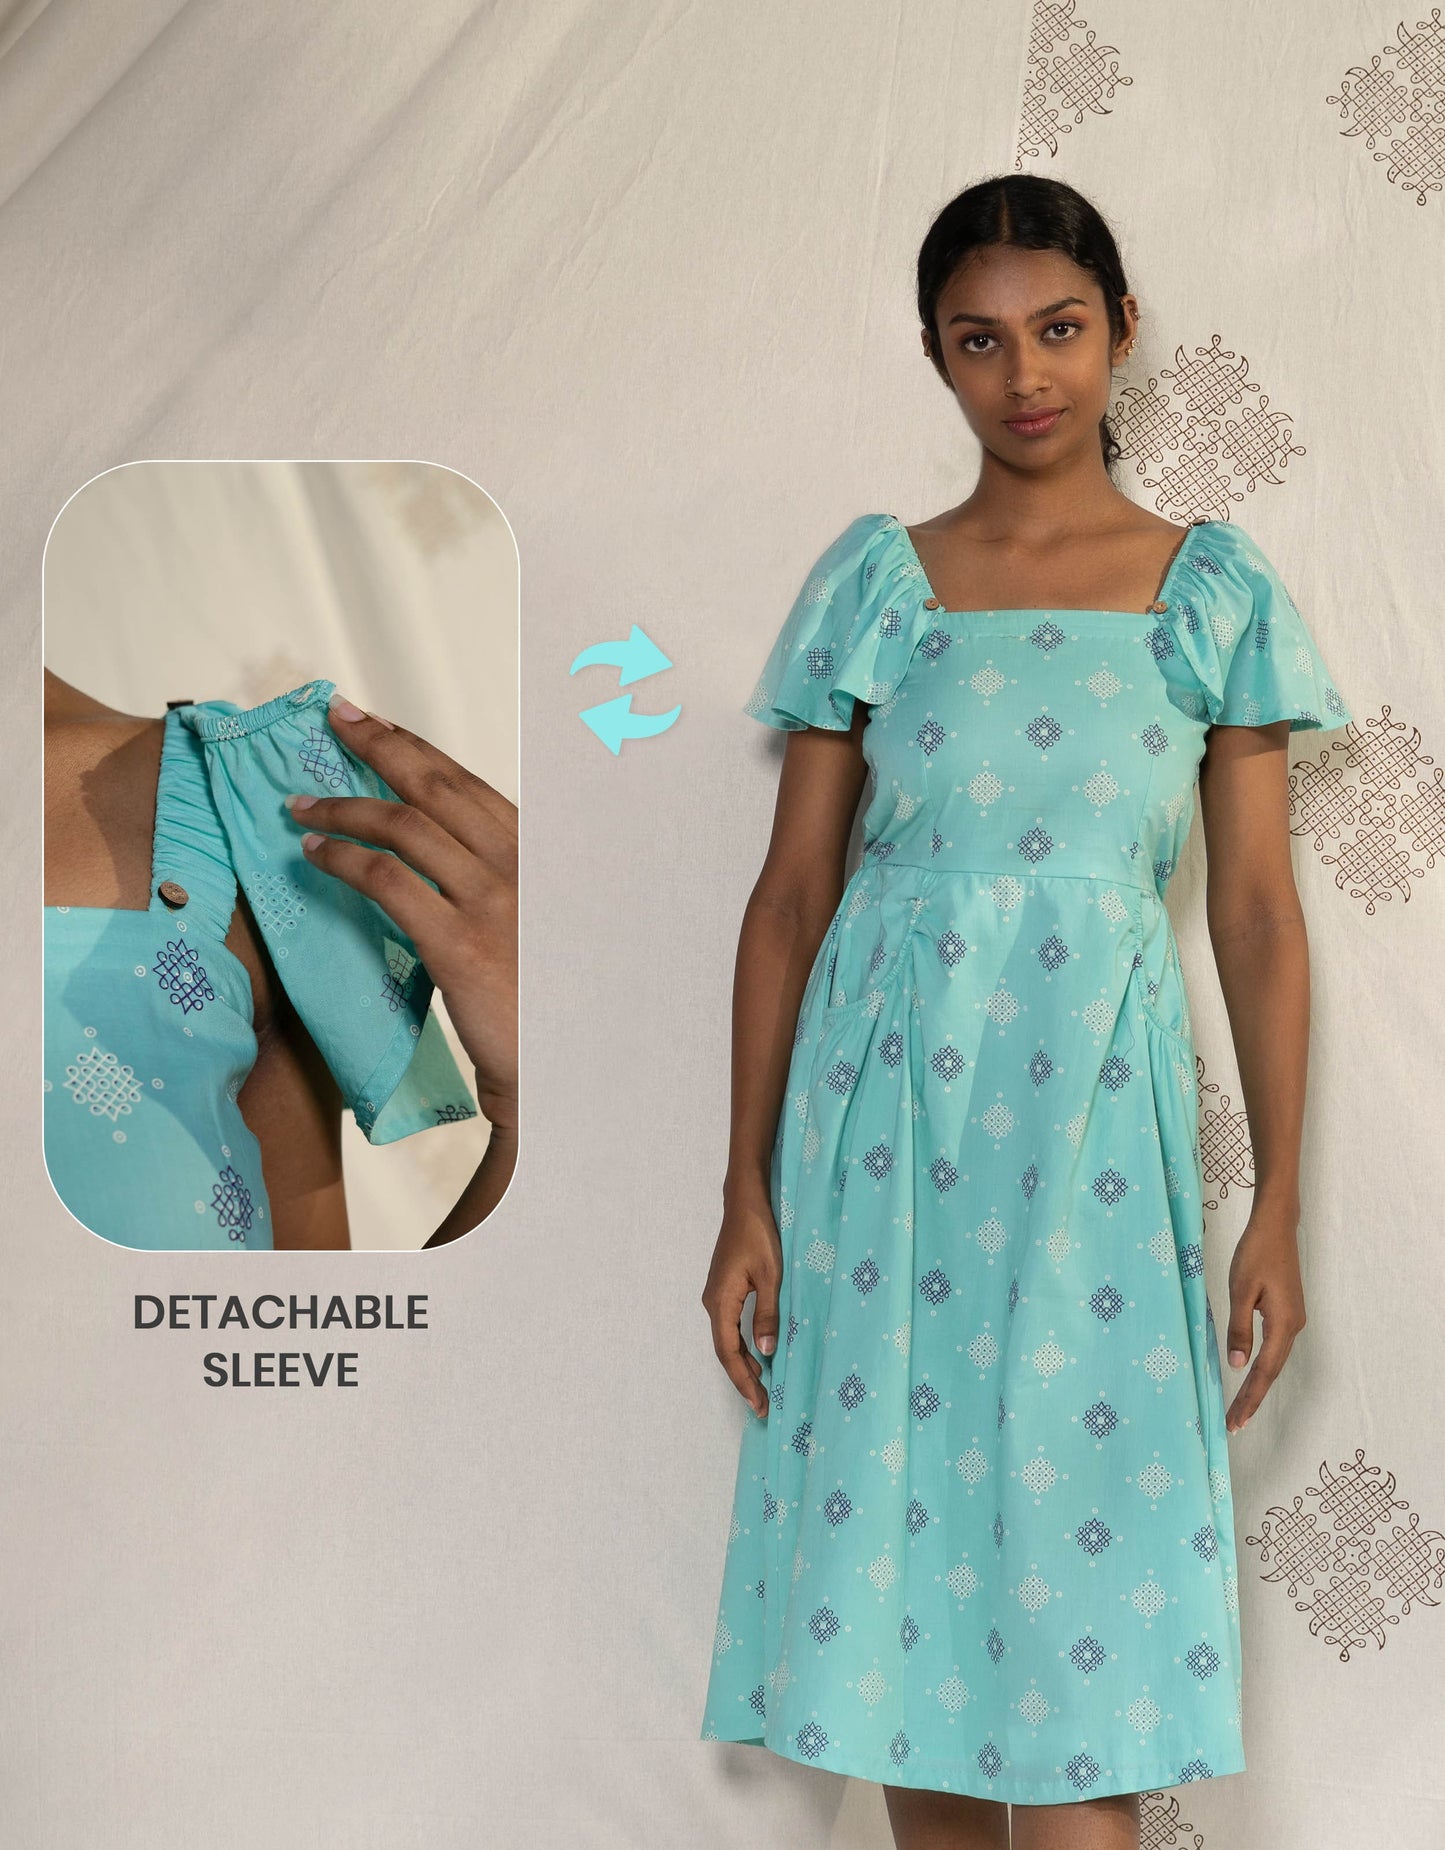 Hueloom mint blue convertible midi dress with detachable sleeve front view showing detachable sleeve feature